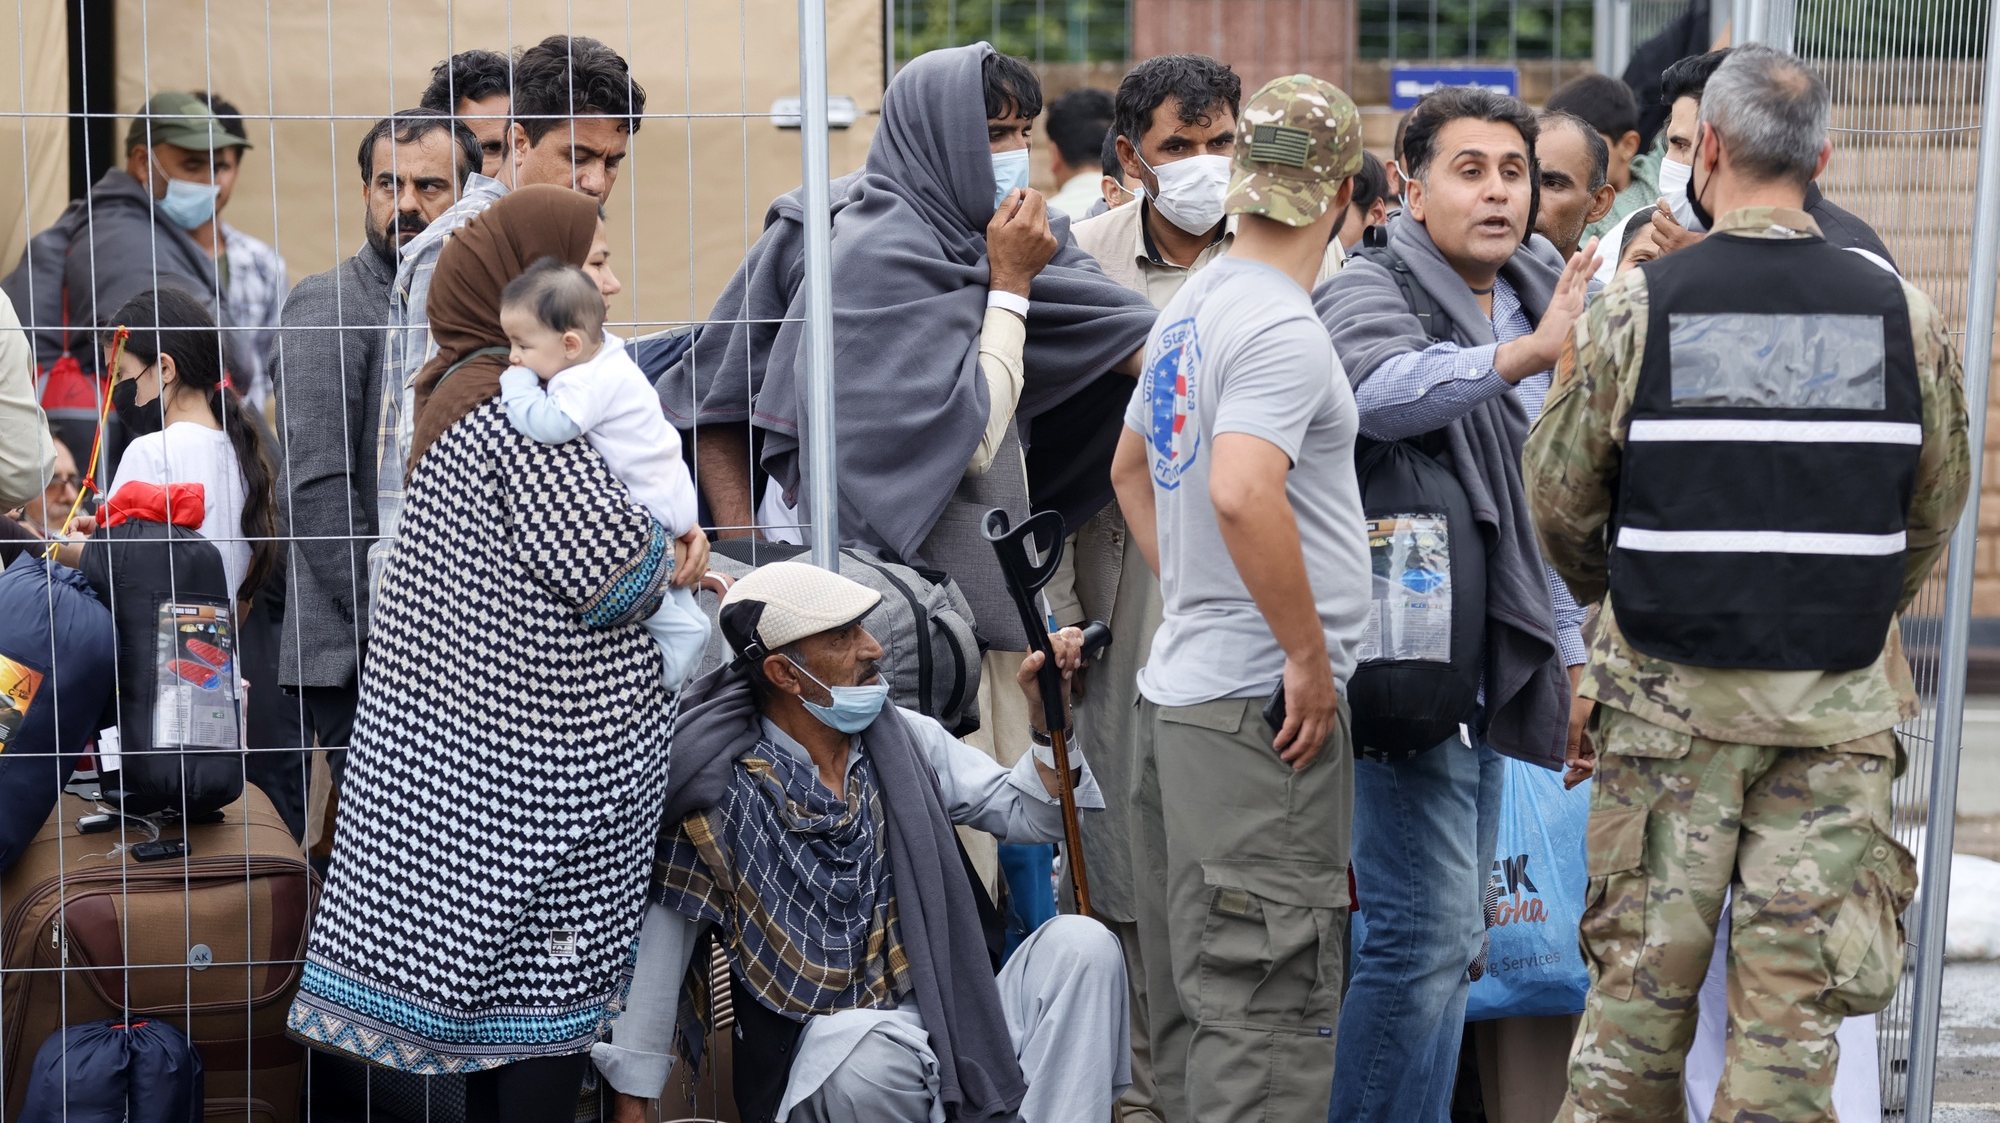 epa09436904 Evacuees from Afghanistan wait at the US Air Base in Ramstein, Germany, 30 August 2021. Ramstein Air Base is serving as major hub in the operation to evacuate people from Afghanistan, as the site is the world&#039;s largest US air force base outside the United States of America.  As part of Operation Allies Refuge, evacuees will receive support such as temporary lodging, food and water and access to medical care as well as religious care at Ramstein Air Base while preparing for onward movements to their final destinations. This operation is facilitating the quick, safe evacuation of US citizens, Special Immigrant Visa applicants, and other at-risk Afghans from Afghanistan.  EPA/RONALD WITTEK